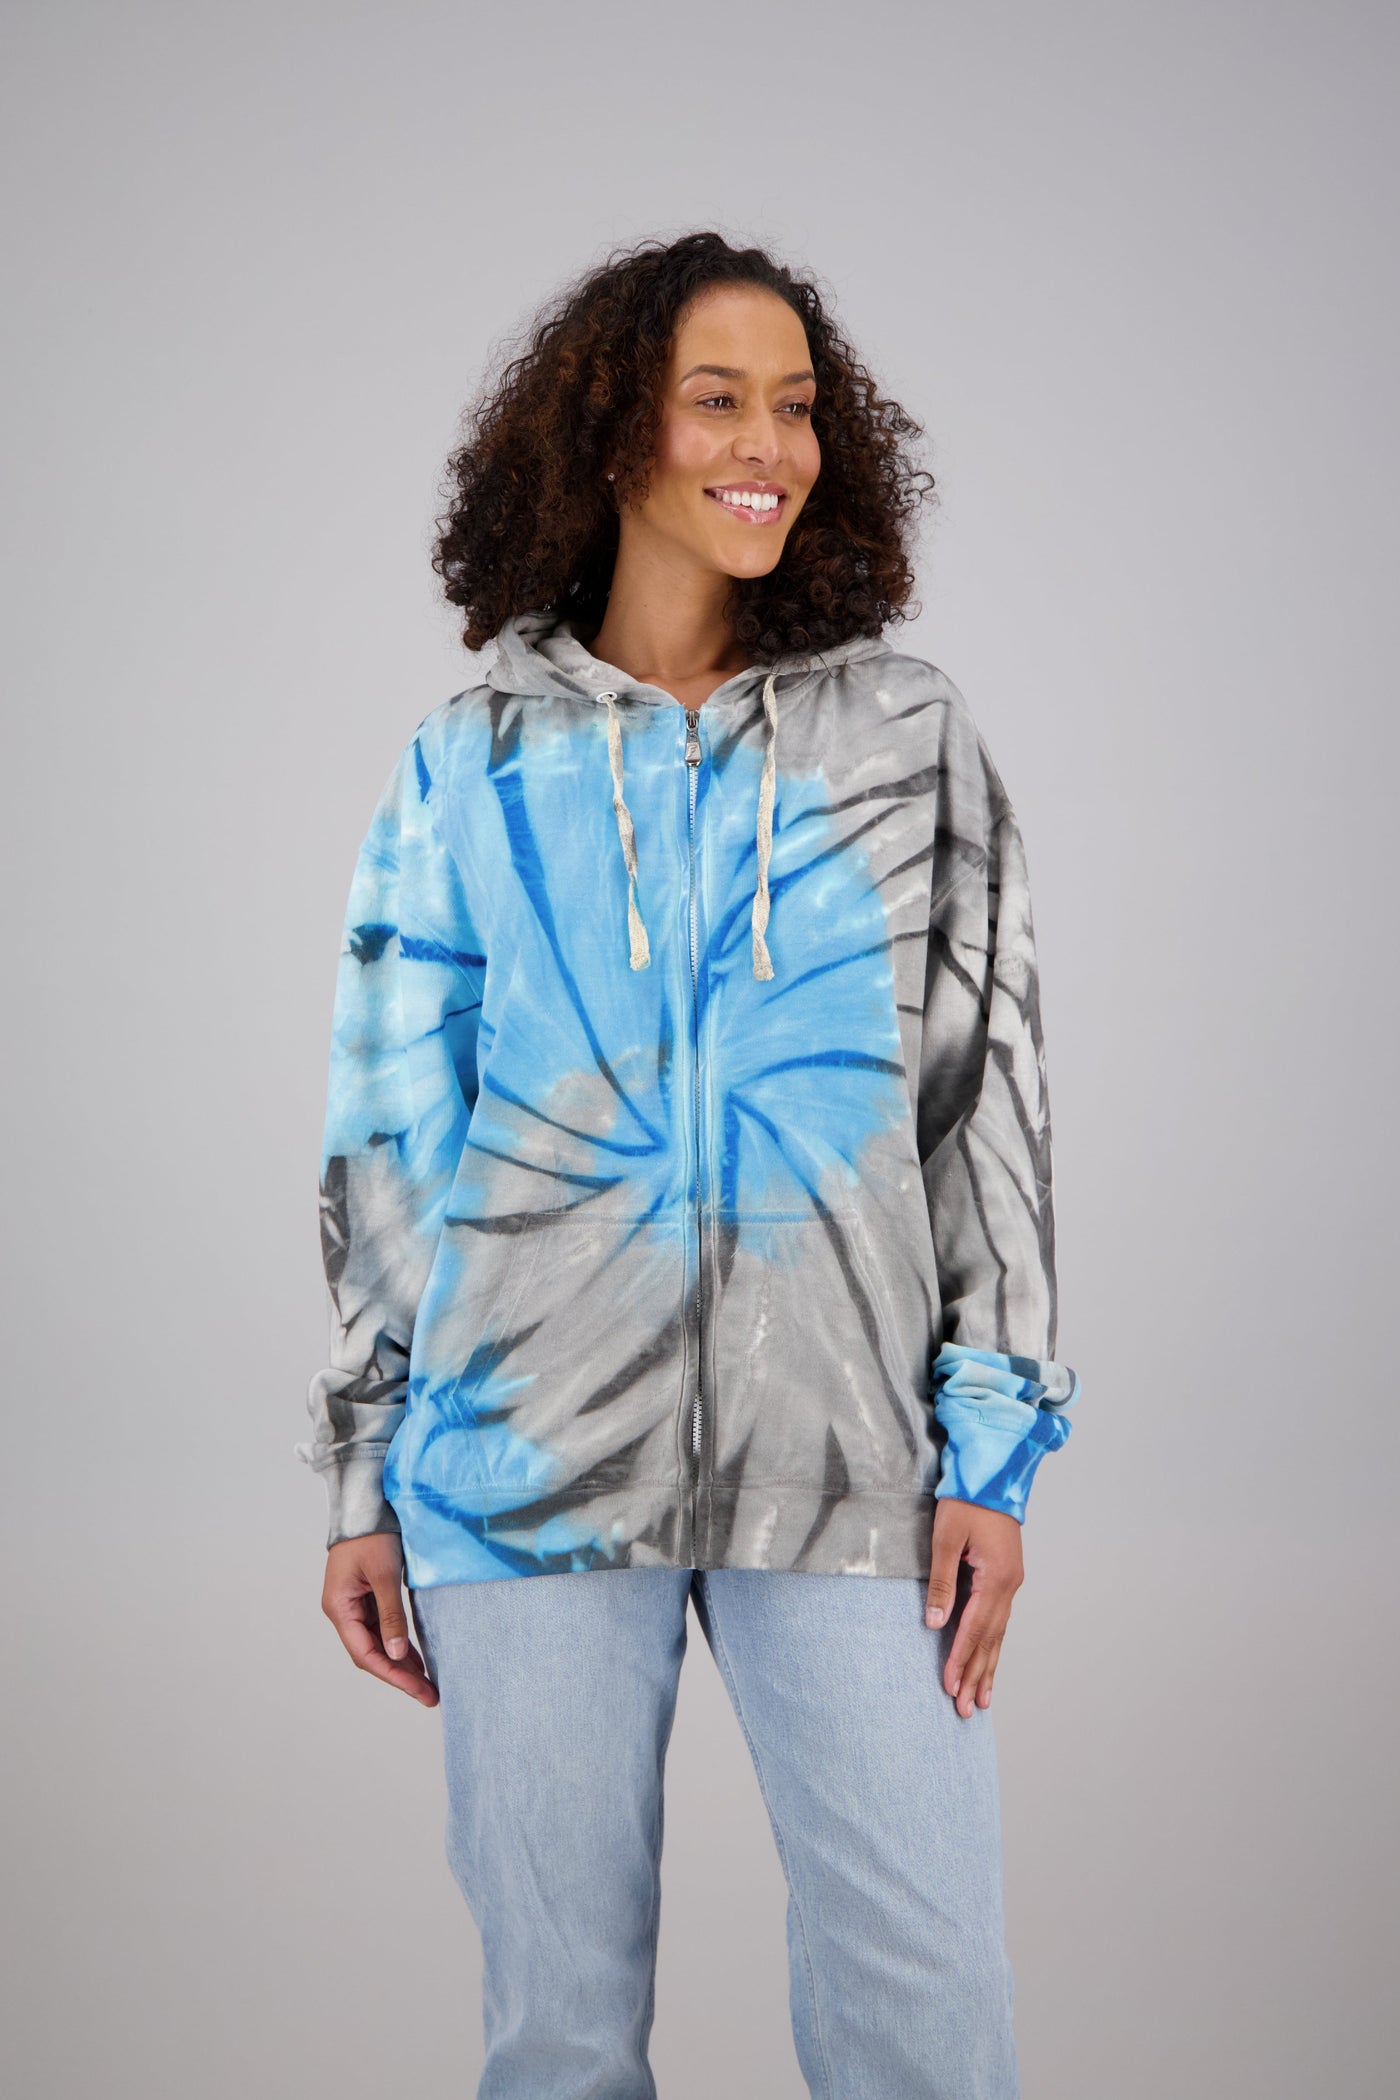 Adult's Tie-Dye Zip-Up Hoodie (2-XL) Cotton/Polyester Blend 9655